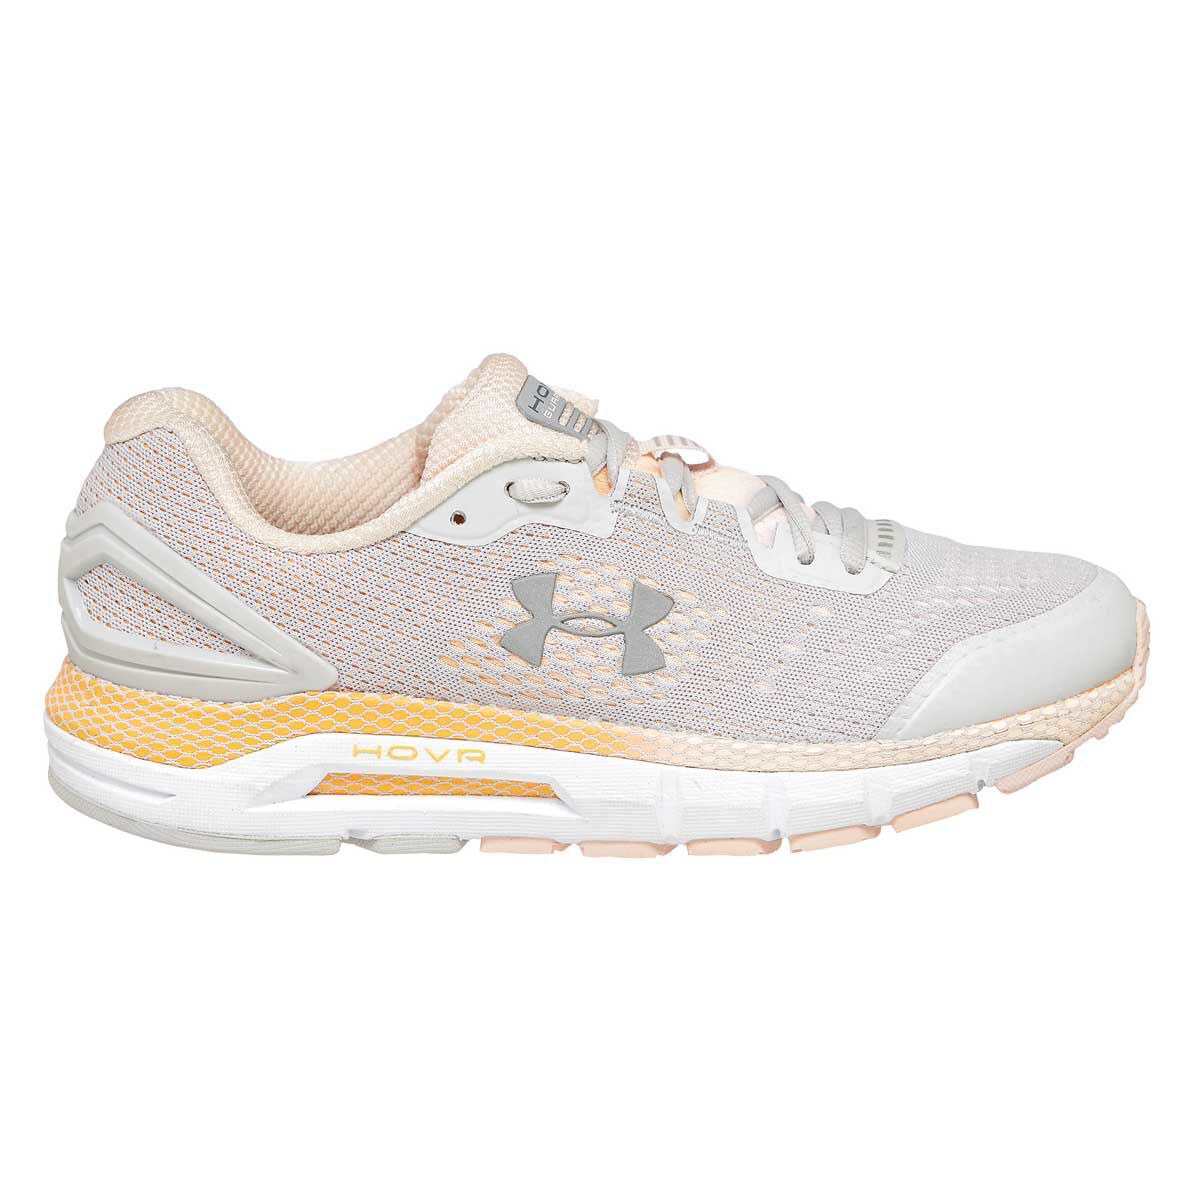 grey and orange under armour shoes